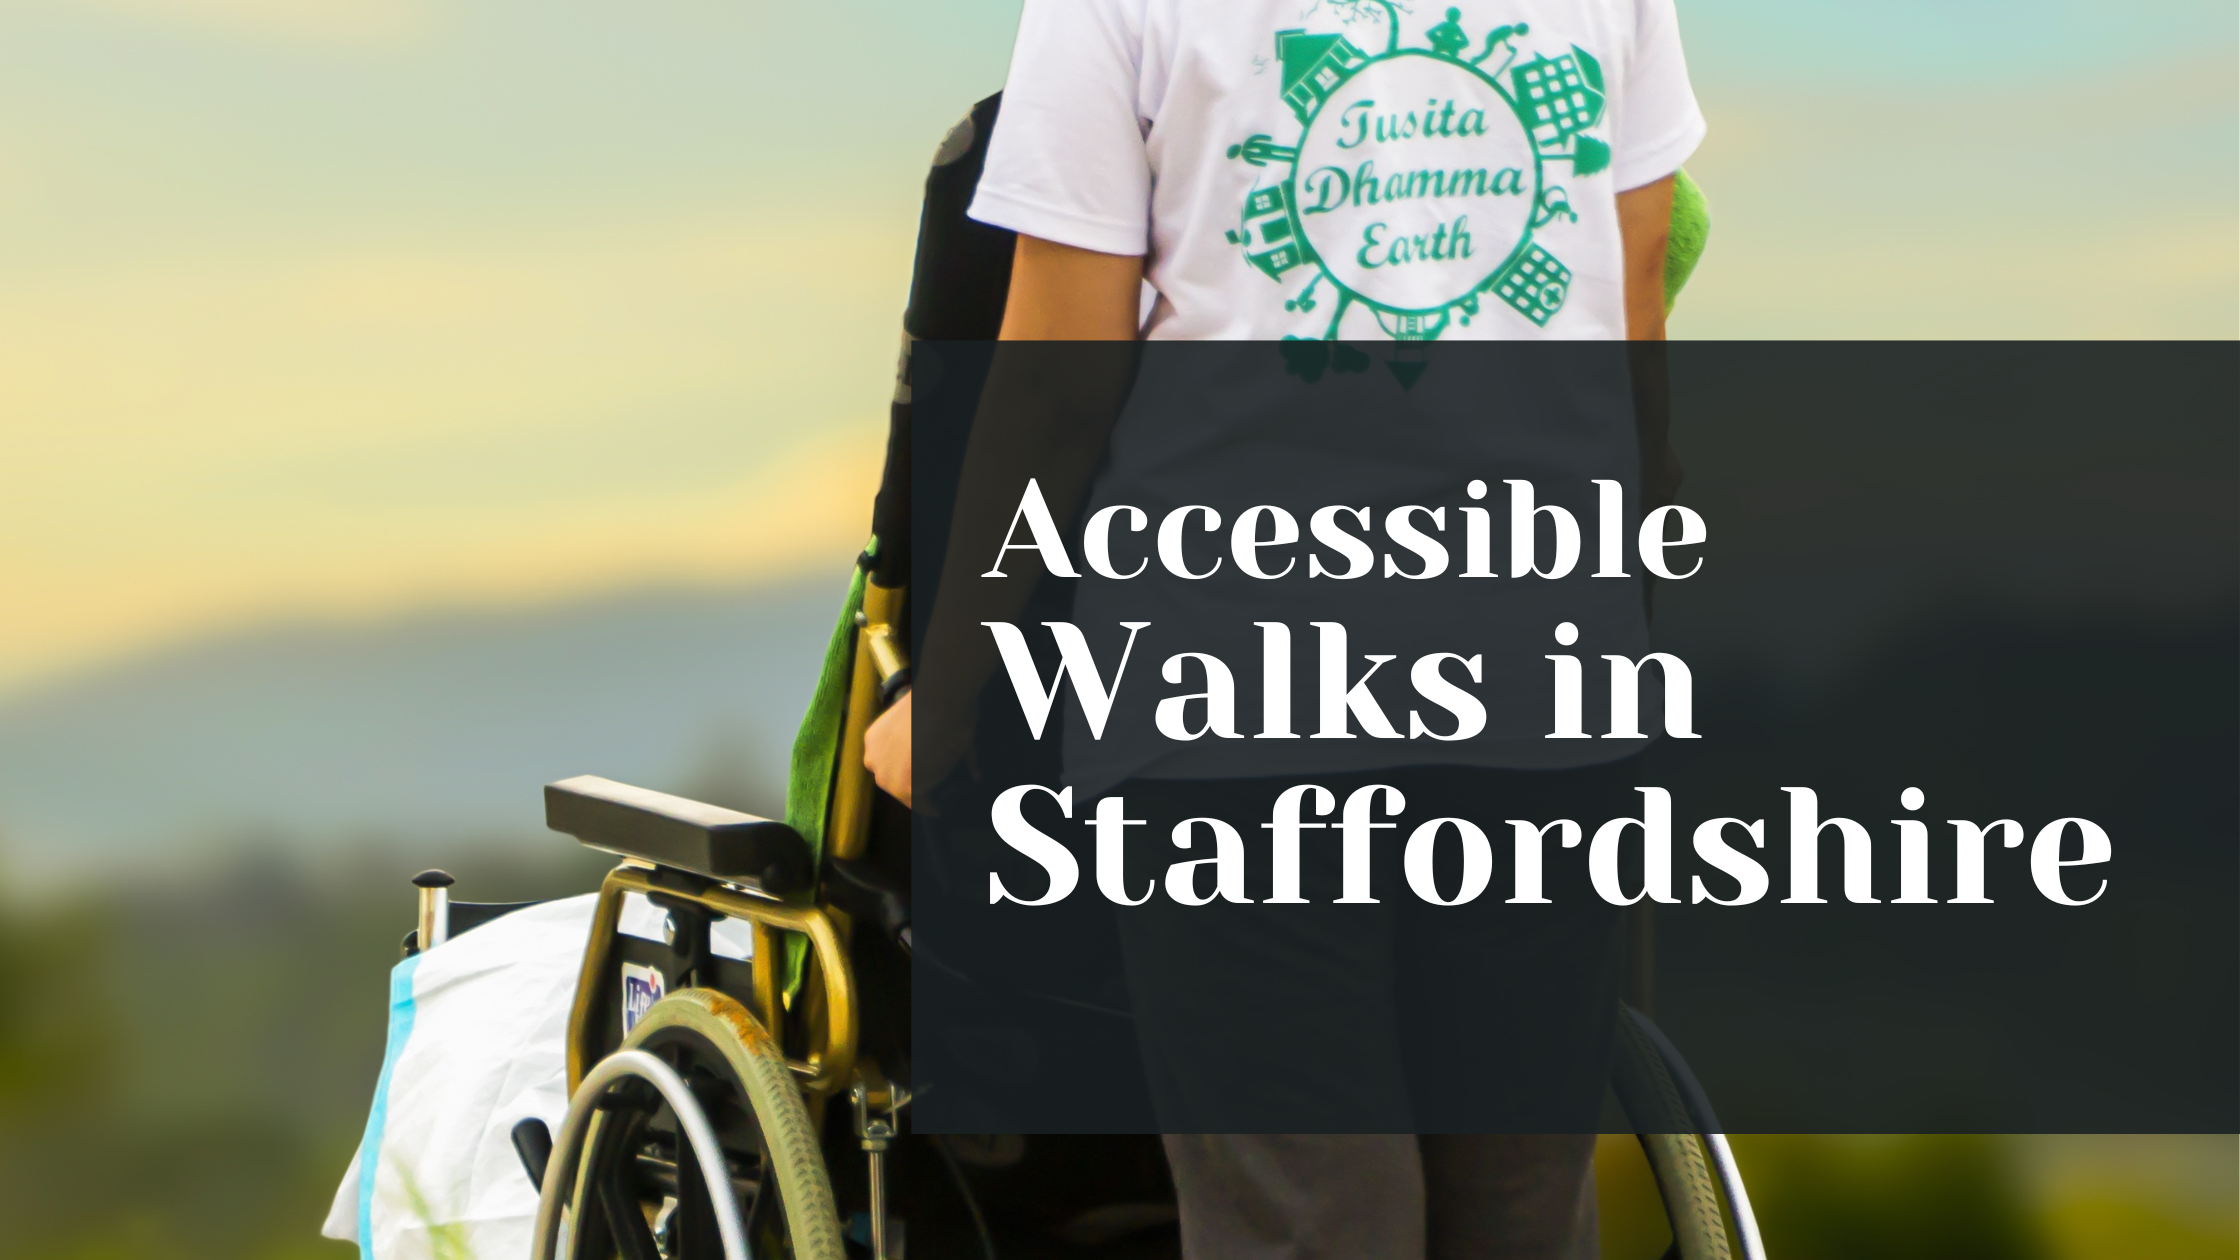 Accessible Walks in Staffordshire